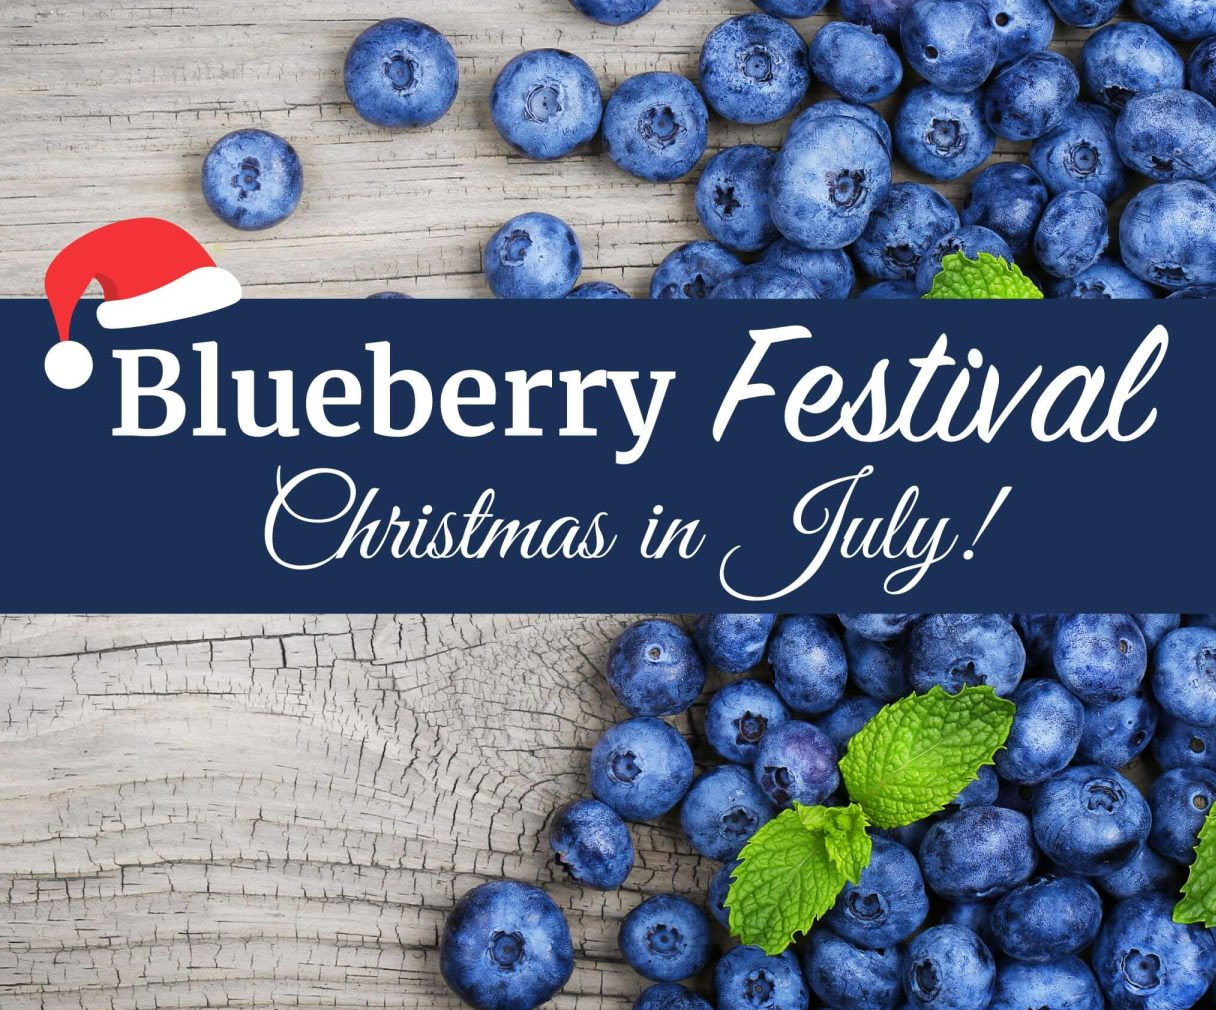 Blueferry Festival at Lyman Orchards